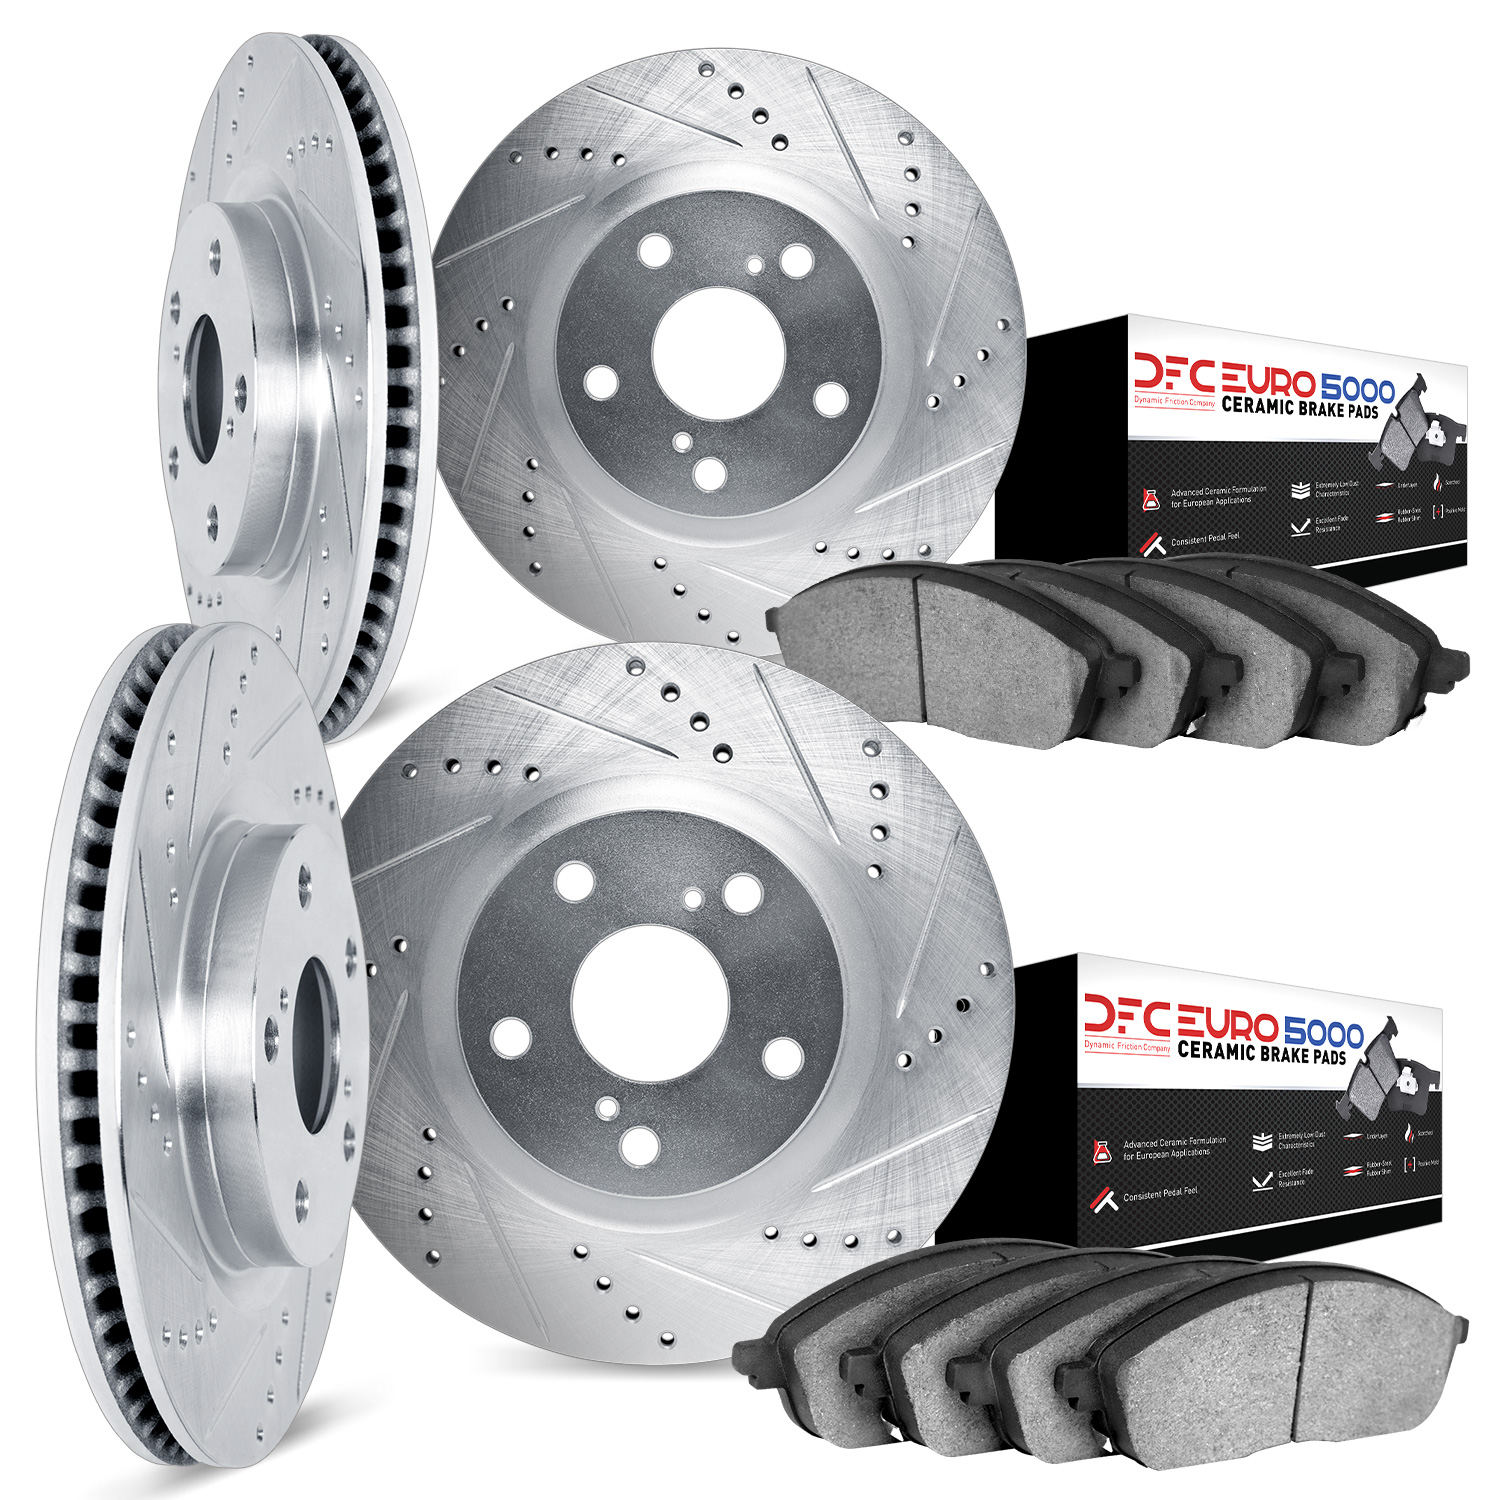 7604-20003 Drilled/Slotted Brake Rotors w/5000 Euro Ceramic Brake Pads Kit [Silver], 1995-1997 Jaguar, Position: Front and Rear